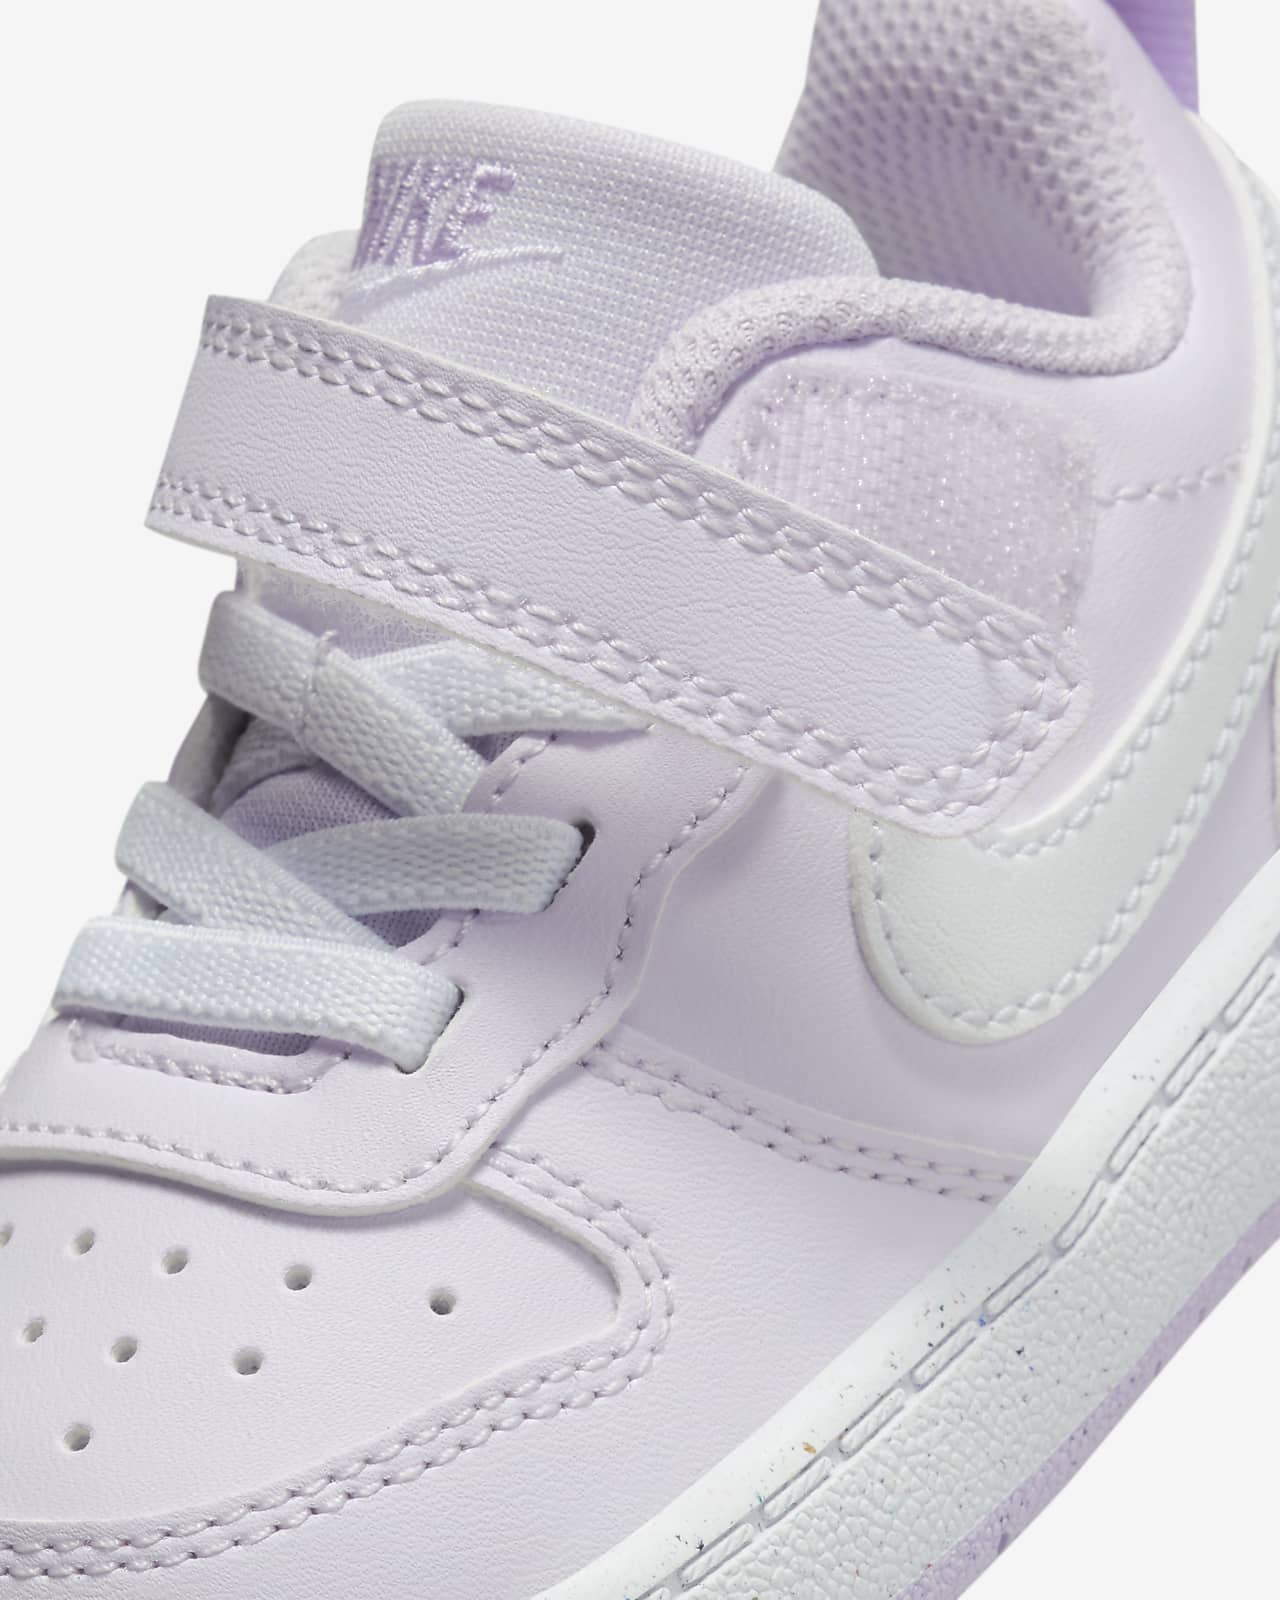 Nike Court Borough Low Shoes. Recraft Baby/Toddler